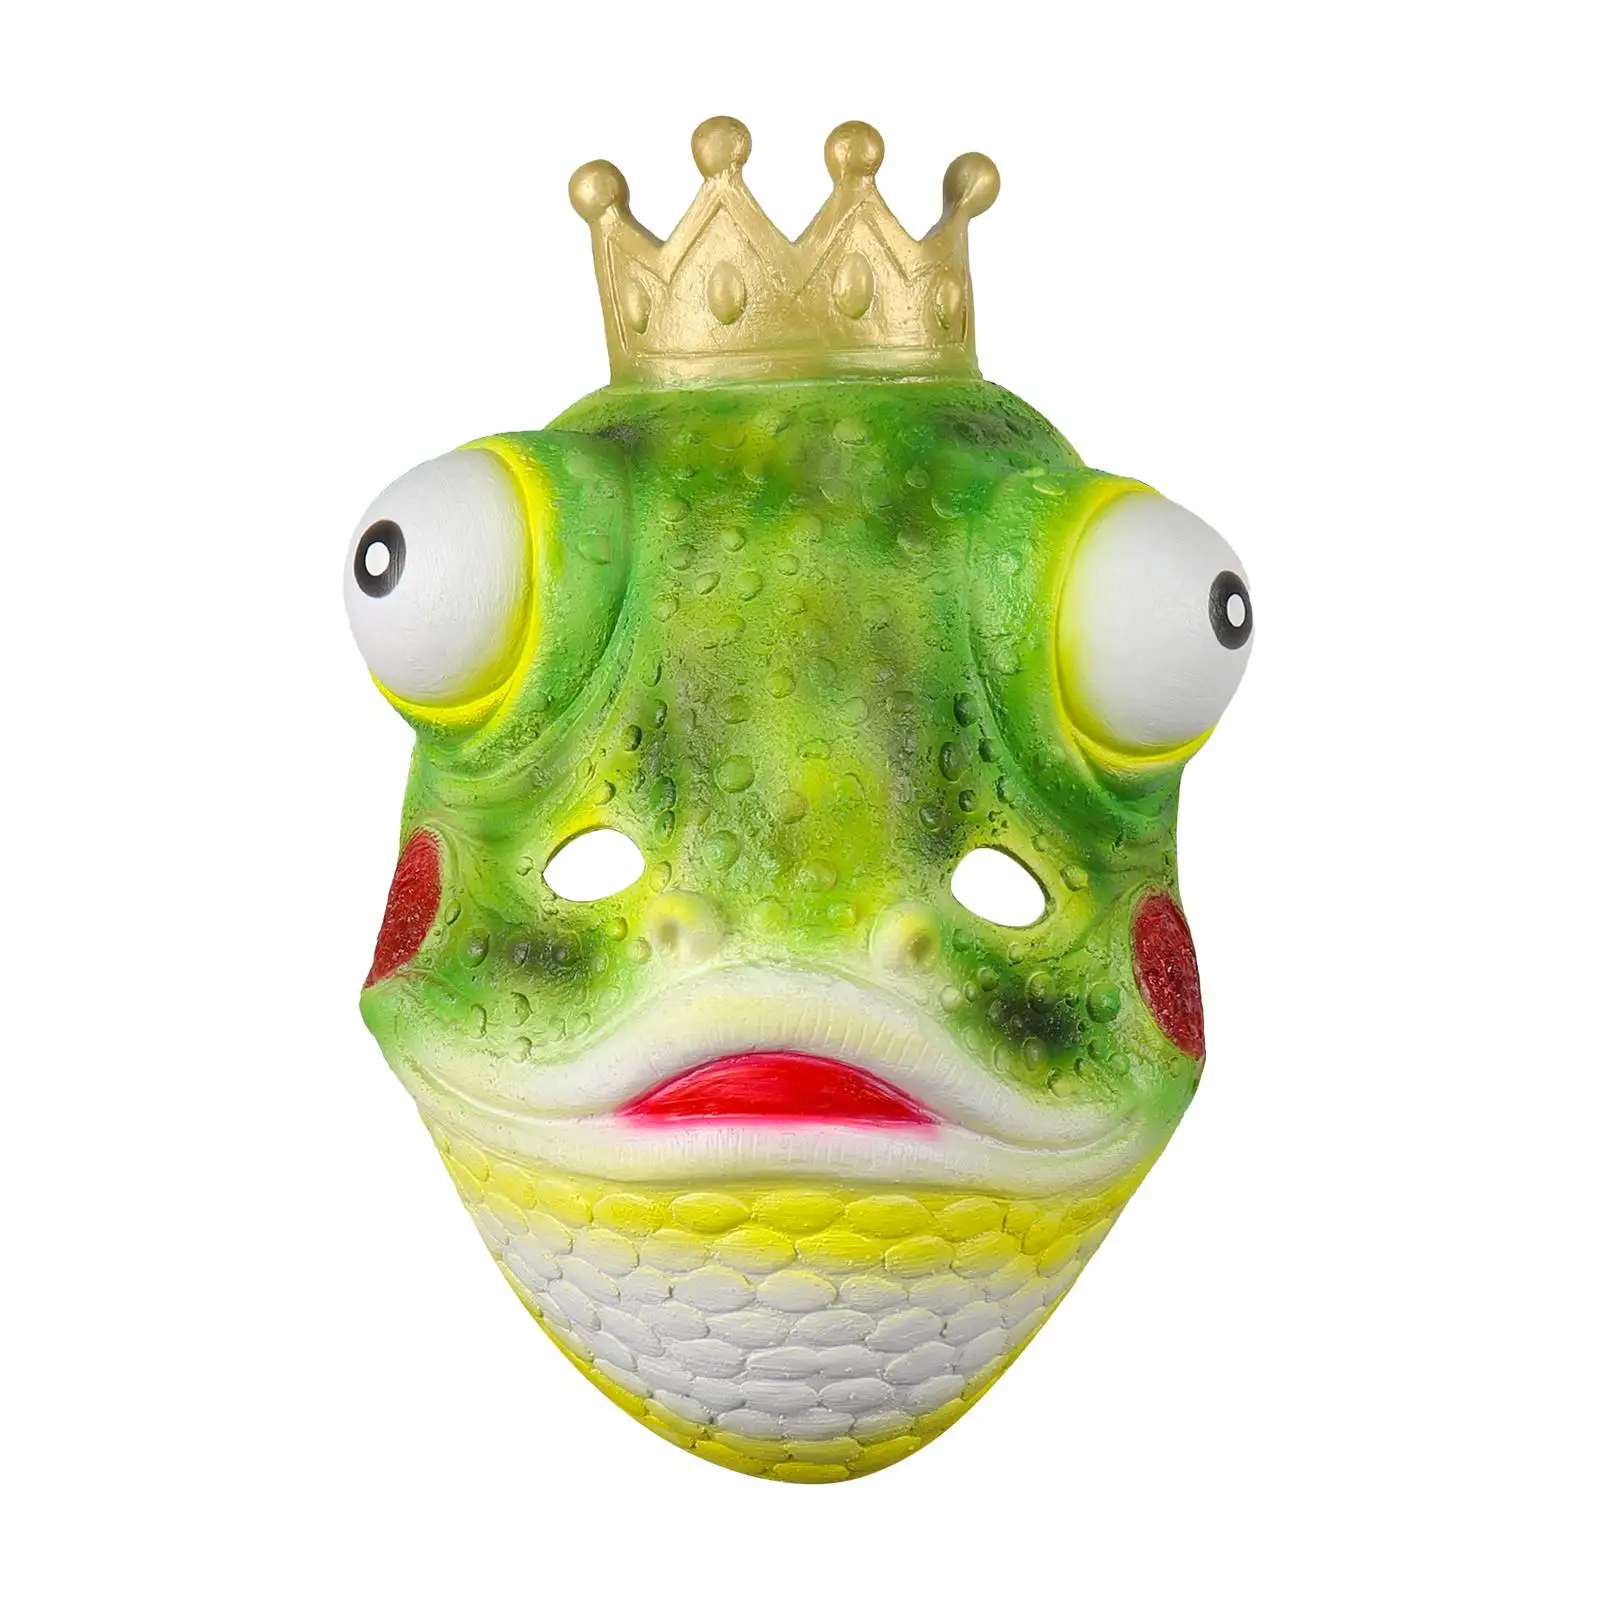 Frog  Mask Headgear Novelty Face Mask Fancy Dress Cosplay  Mask for Night Club Prom Halloween Party Festival